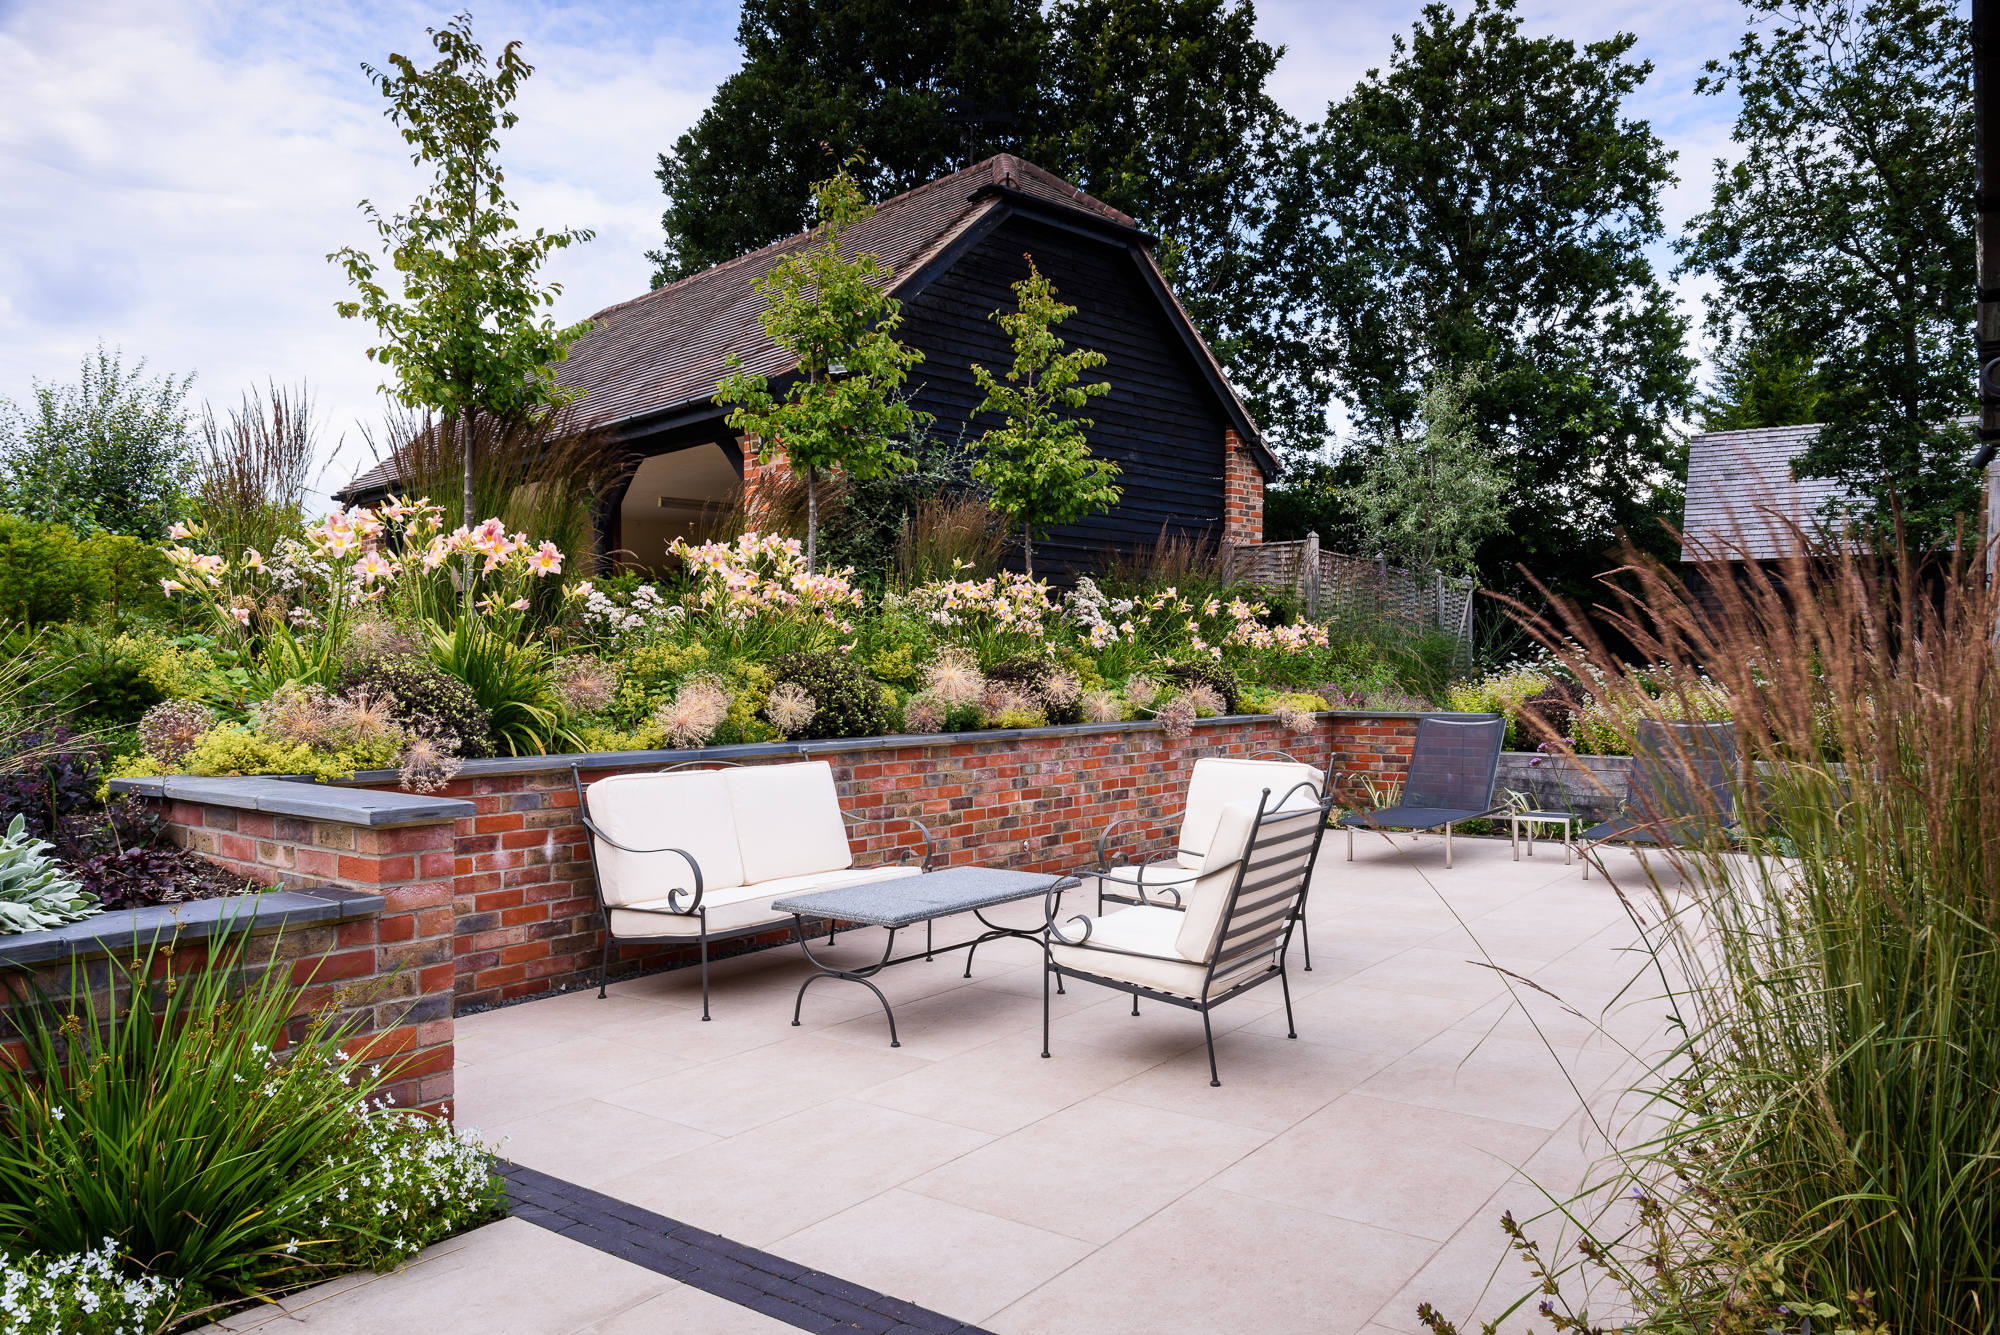 Porcelain paved terrace with brick retaining walls and slate coping